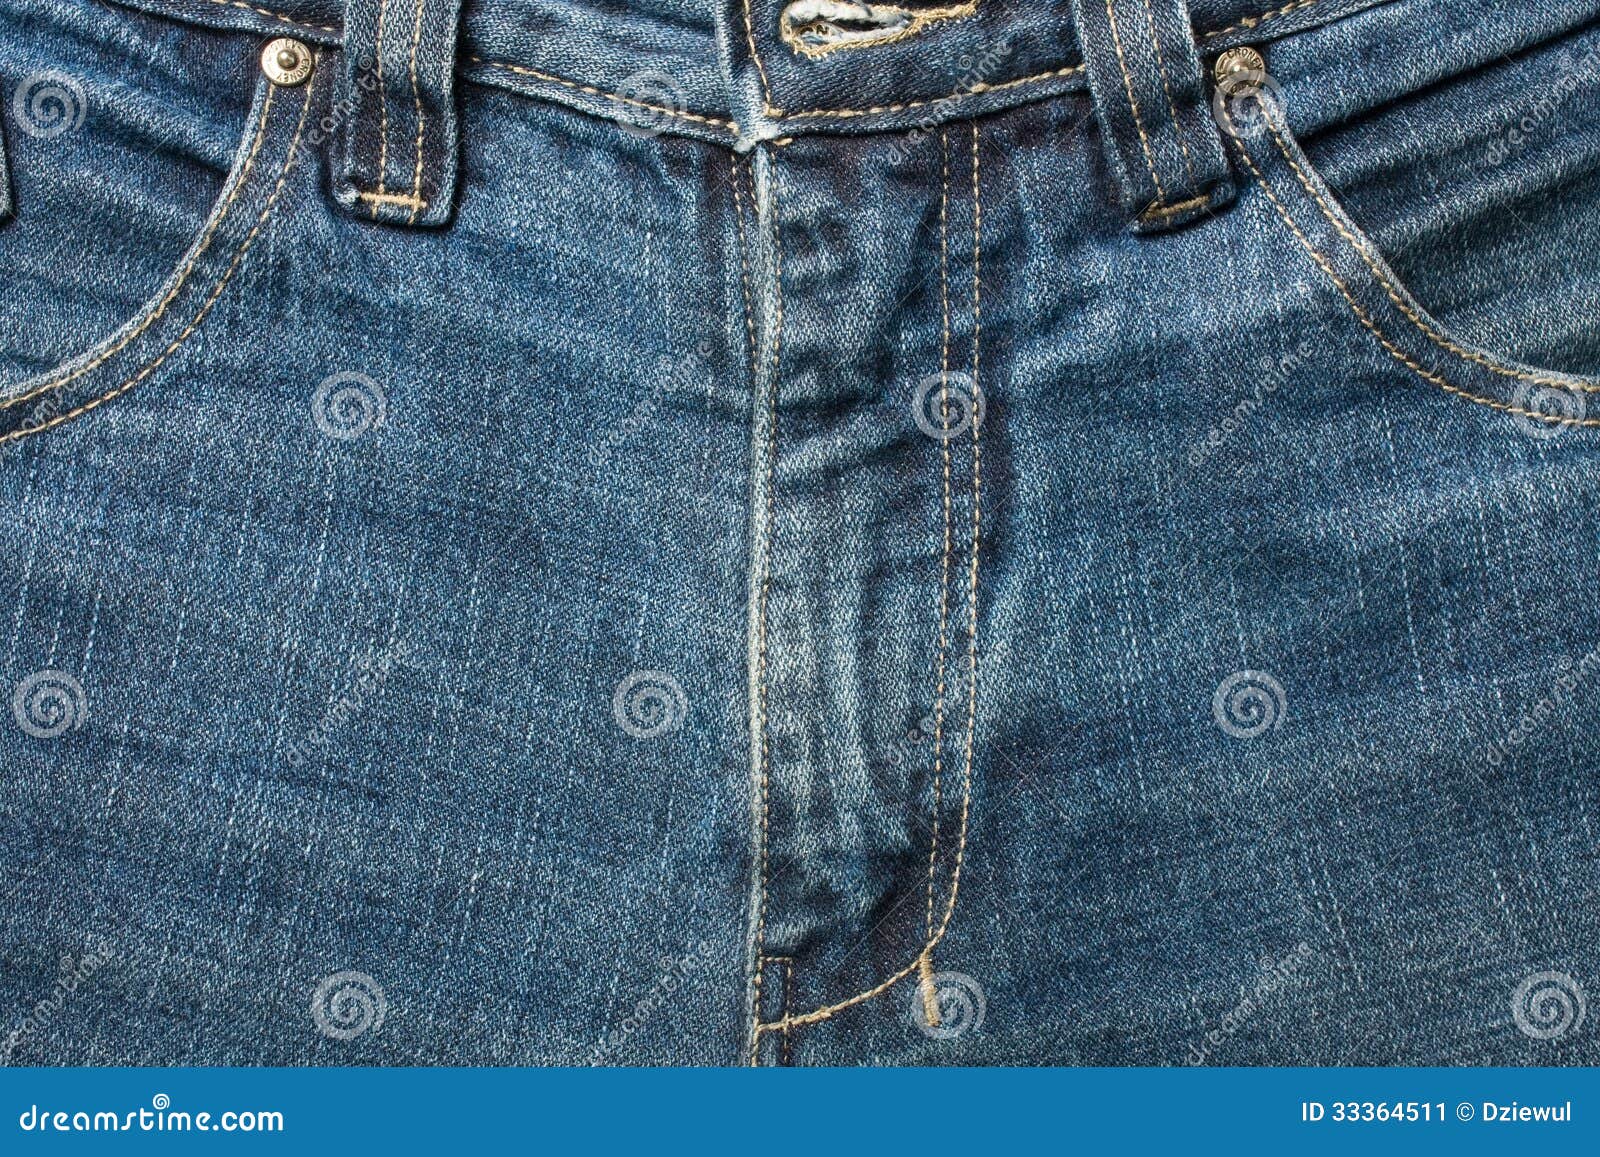 Jeans background stock image. Image of fiber, country - 33364511